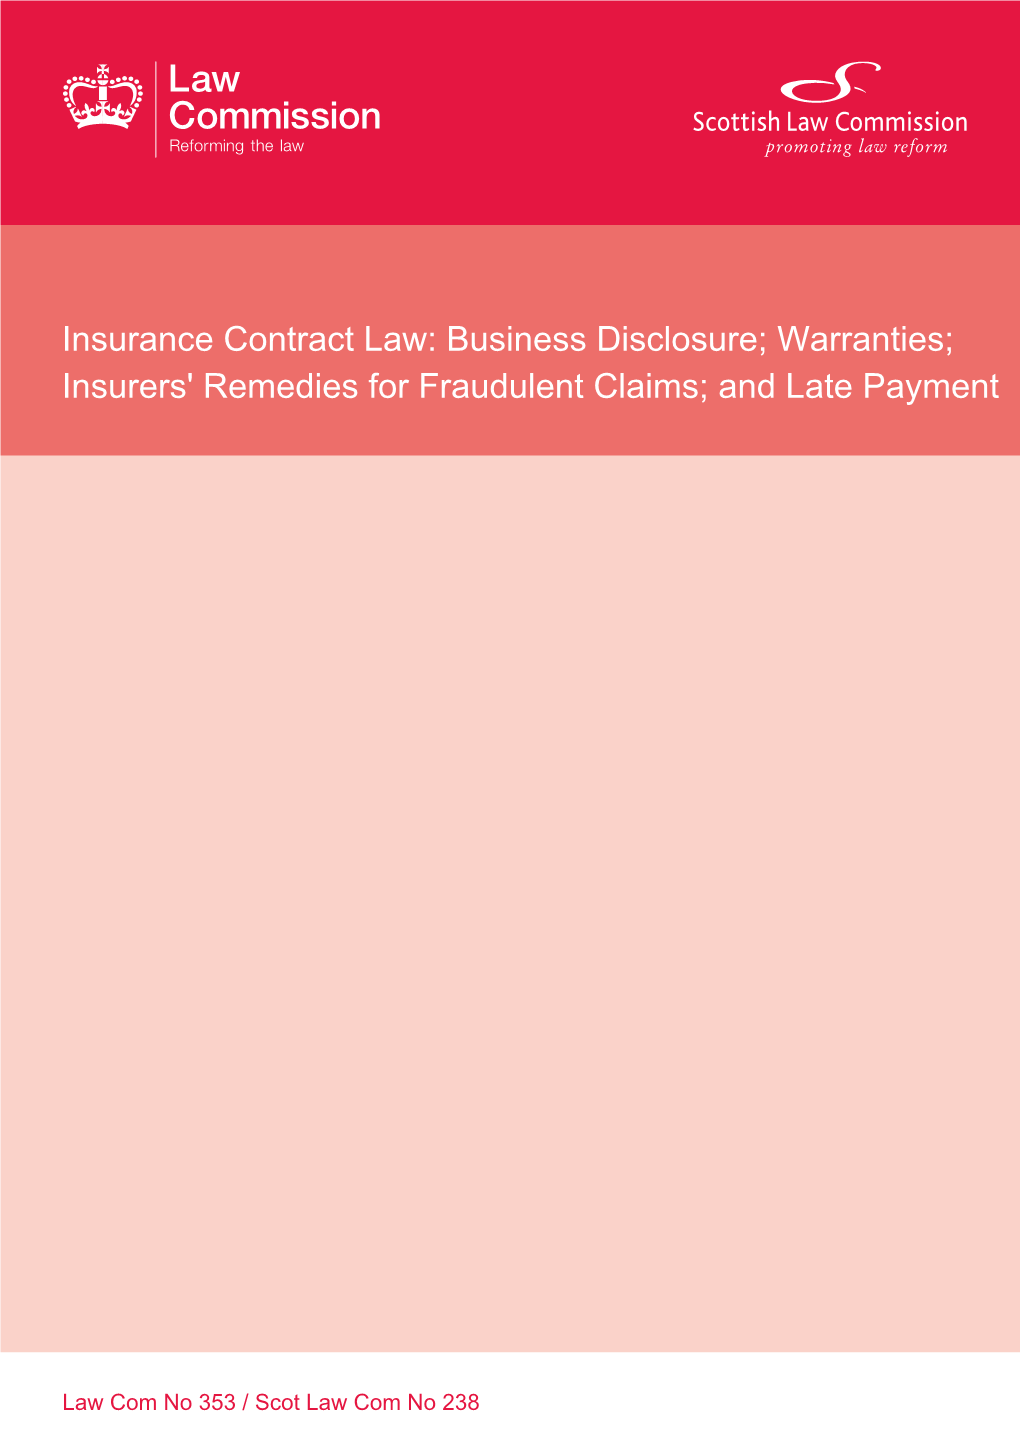 Warranties; Insurers' Remedies for Fraudulent Claims; and Late